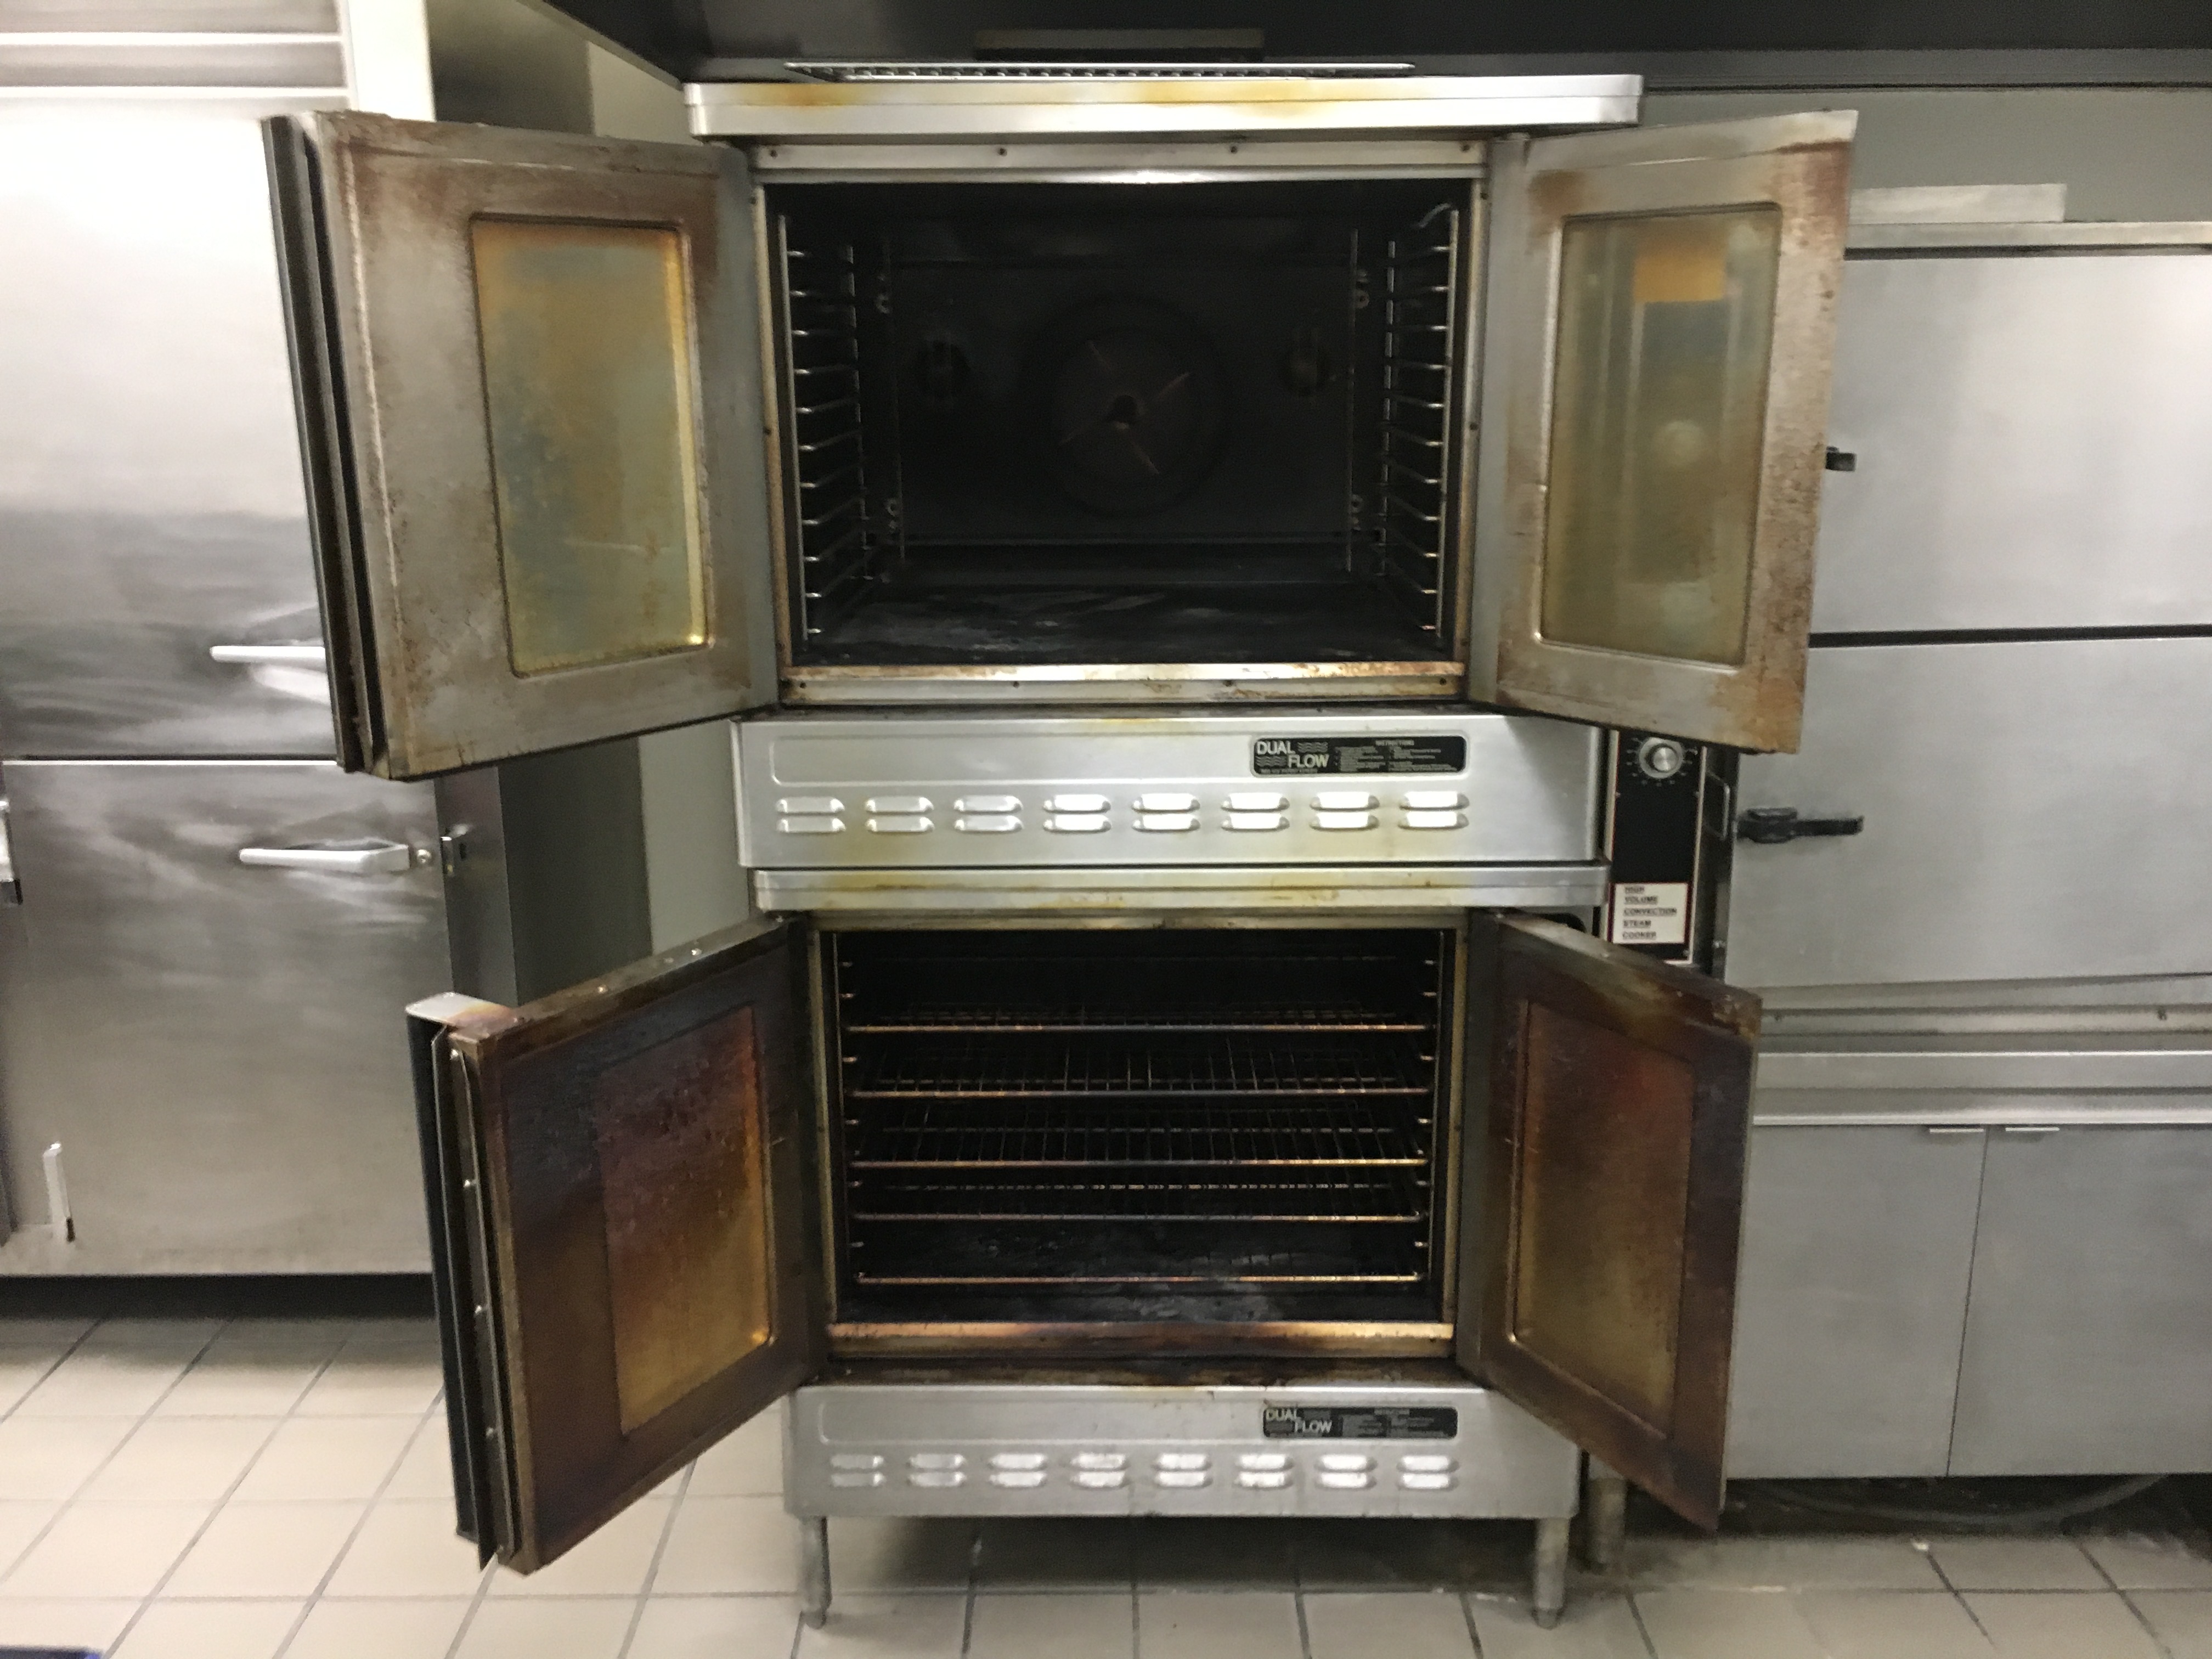 Convection Oven Cleaning Before